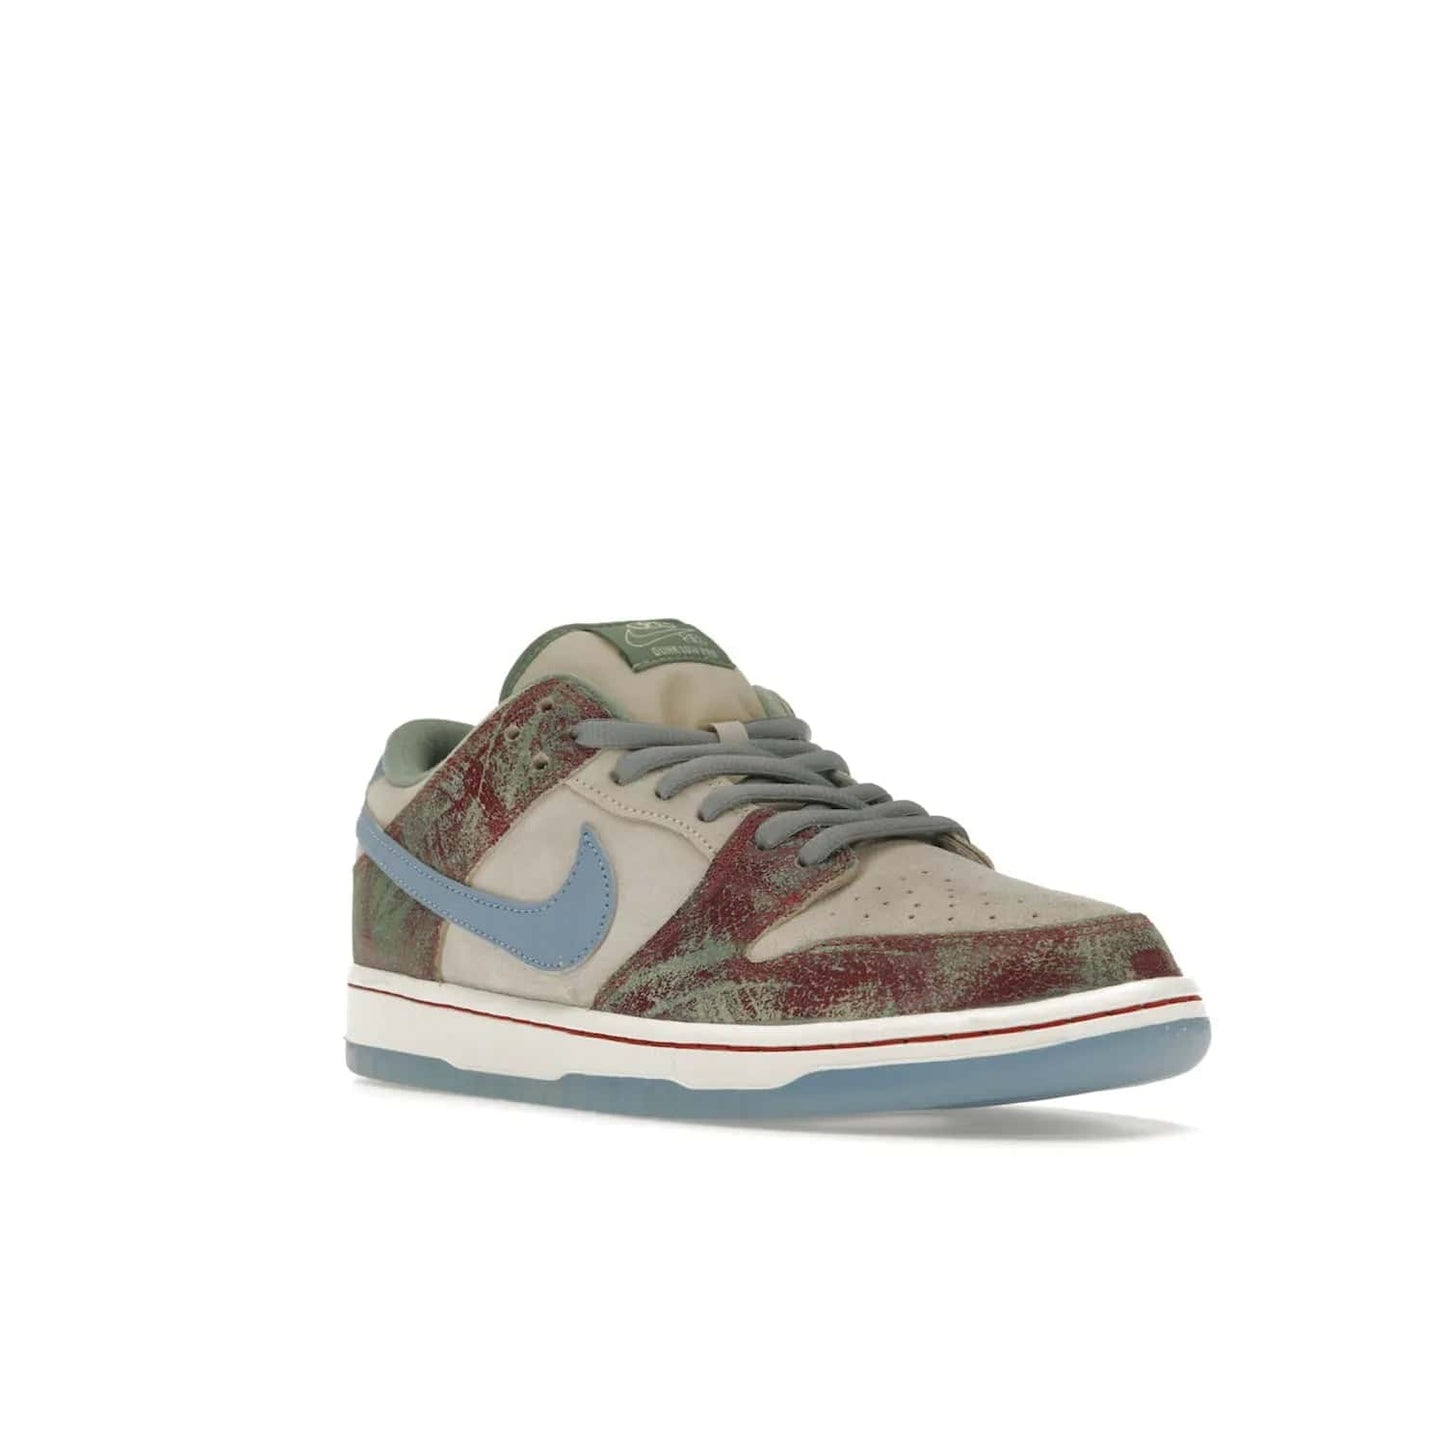 Nike SB Dunk Low Crenshaw Skate Club - Image 6 - Only at www.BallersClubKickz.com - Introducing the Nike SB Dunk Low Crenshaw Skate Club! Classic skate shoes with Sail and Light Blue upper, Cedar accents, padded collars and superior grip for comfortable, stable performance and style. Ideal for any skate session.